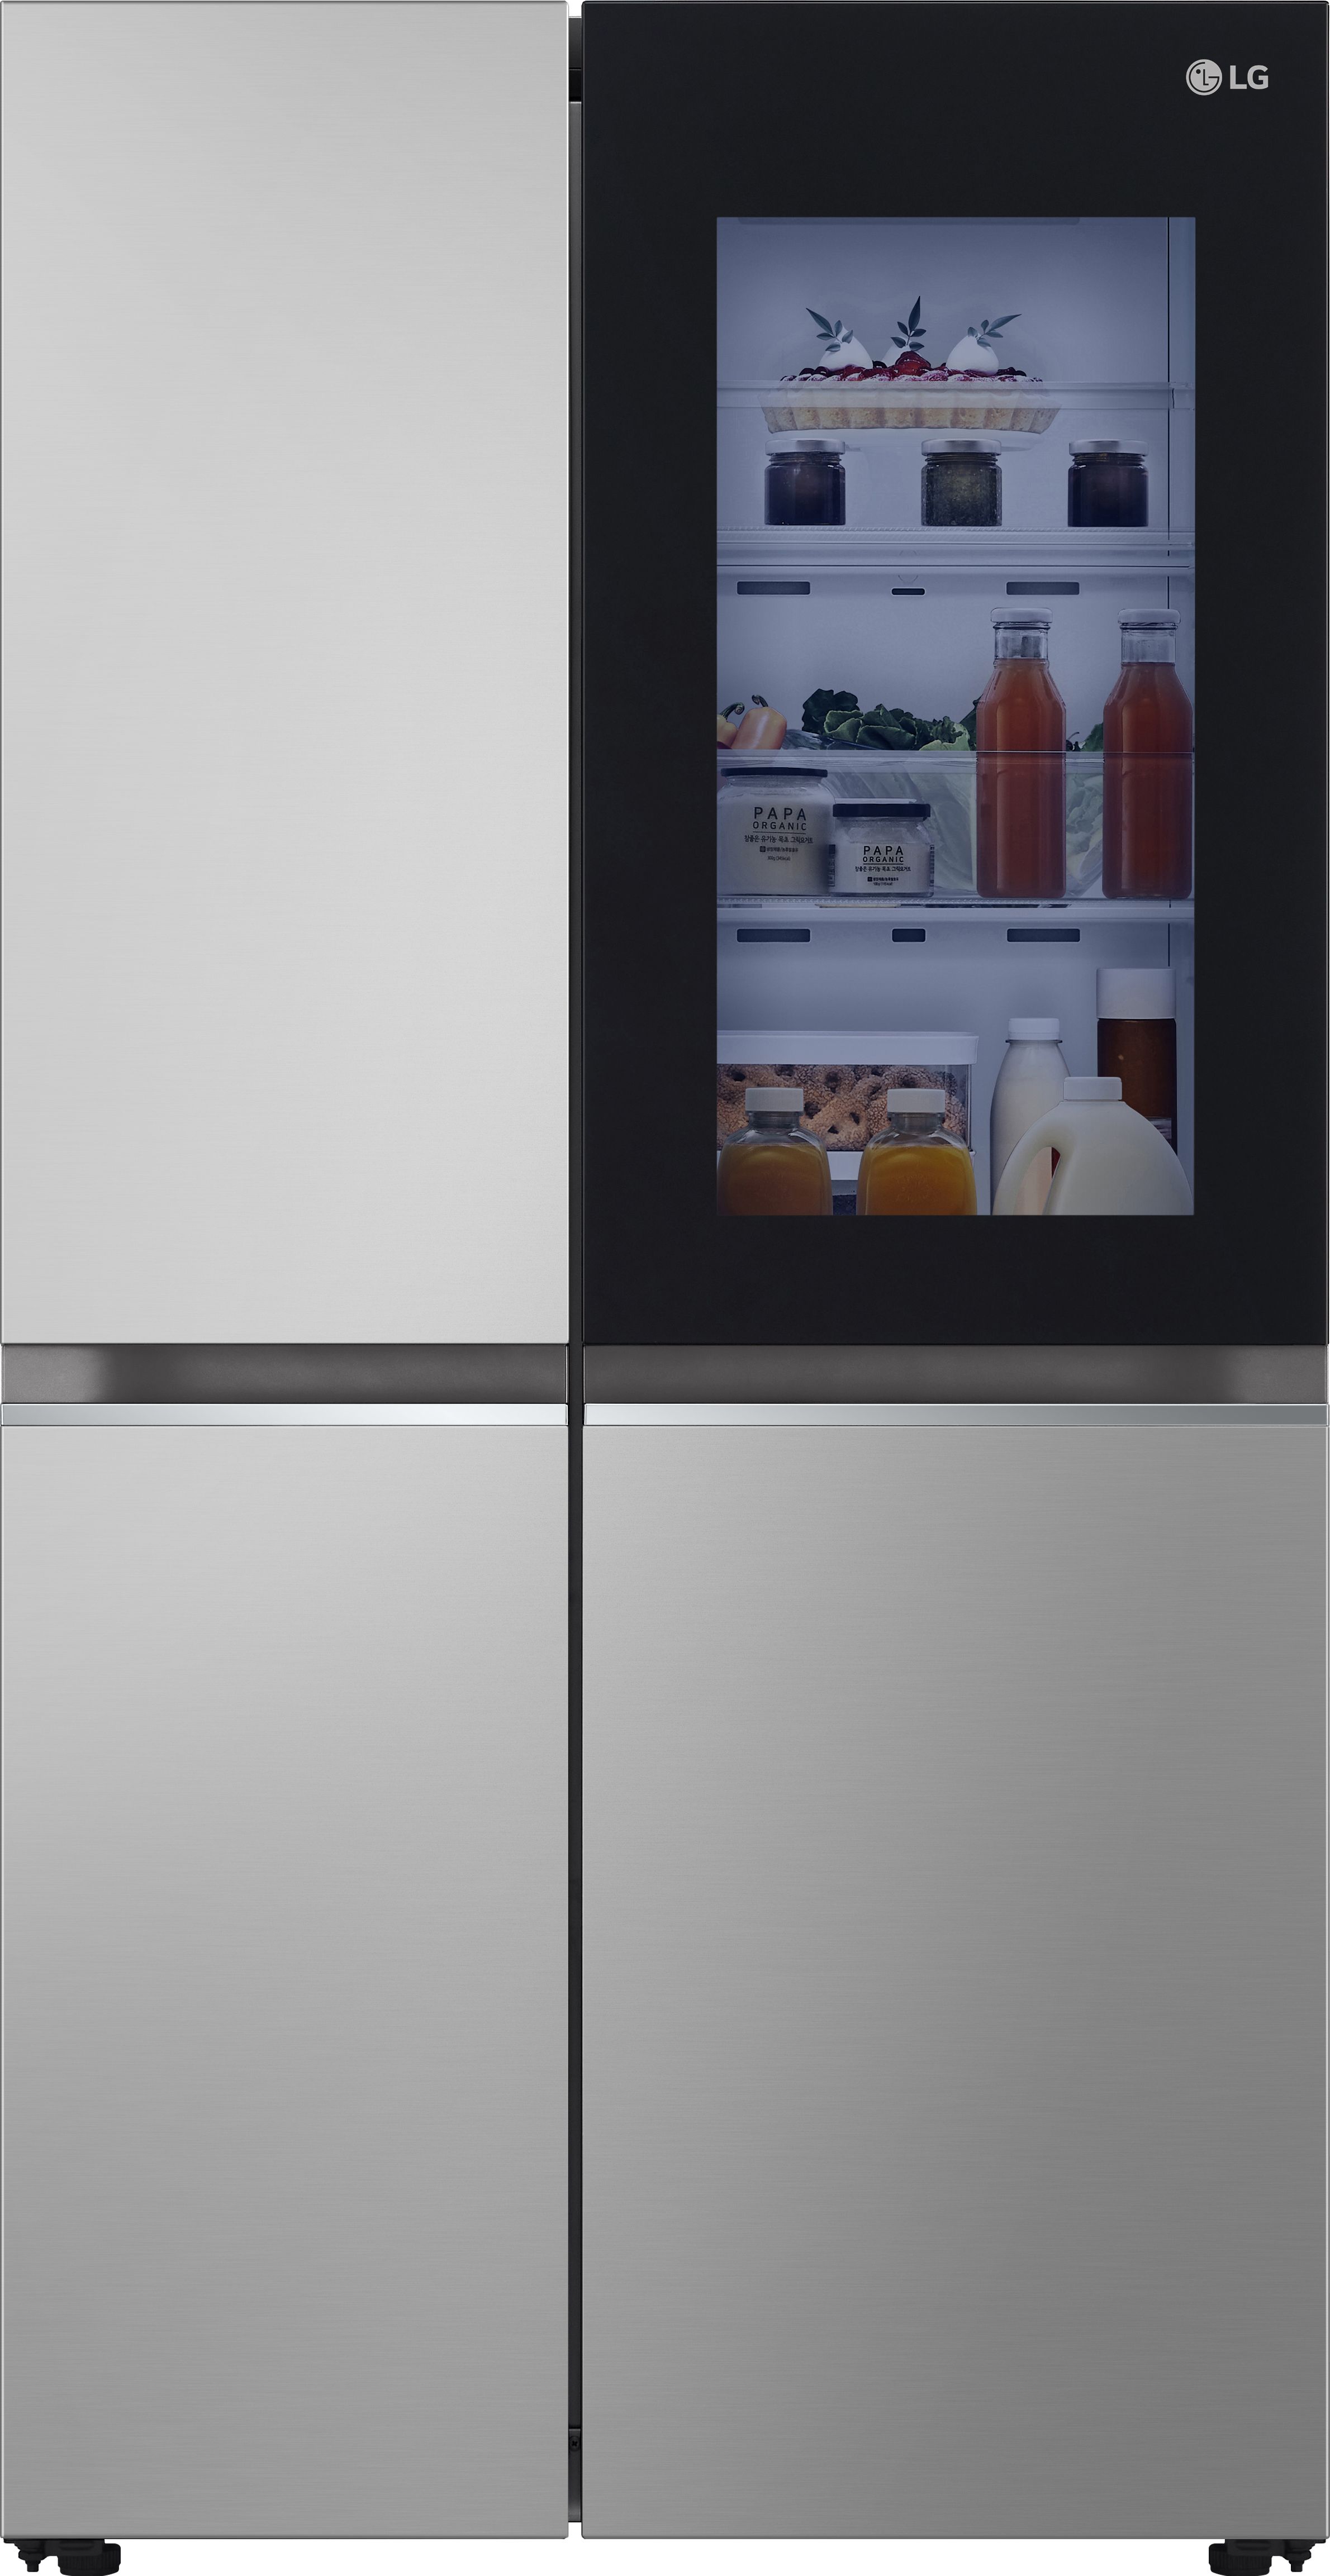 LG InstaView GSVV80PYLL Wifi Connected Frost Free American Fridge Freezer - Prime Silver - E Rated, Silver